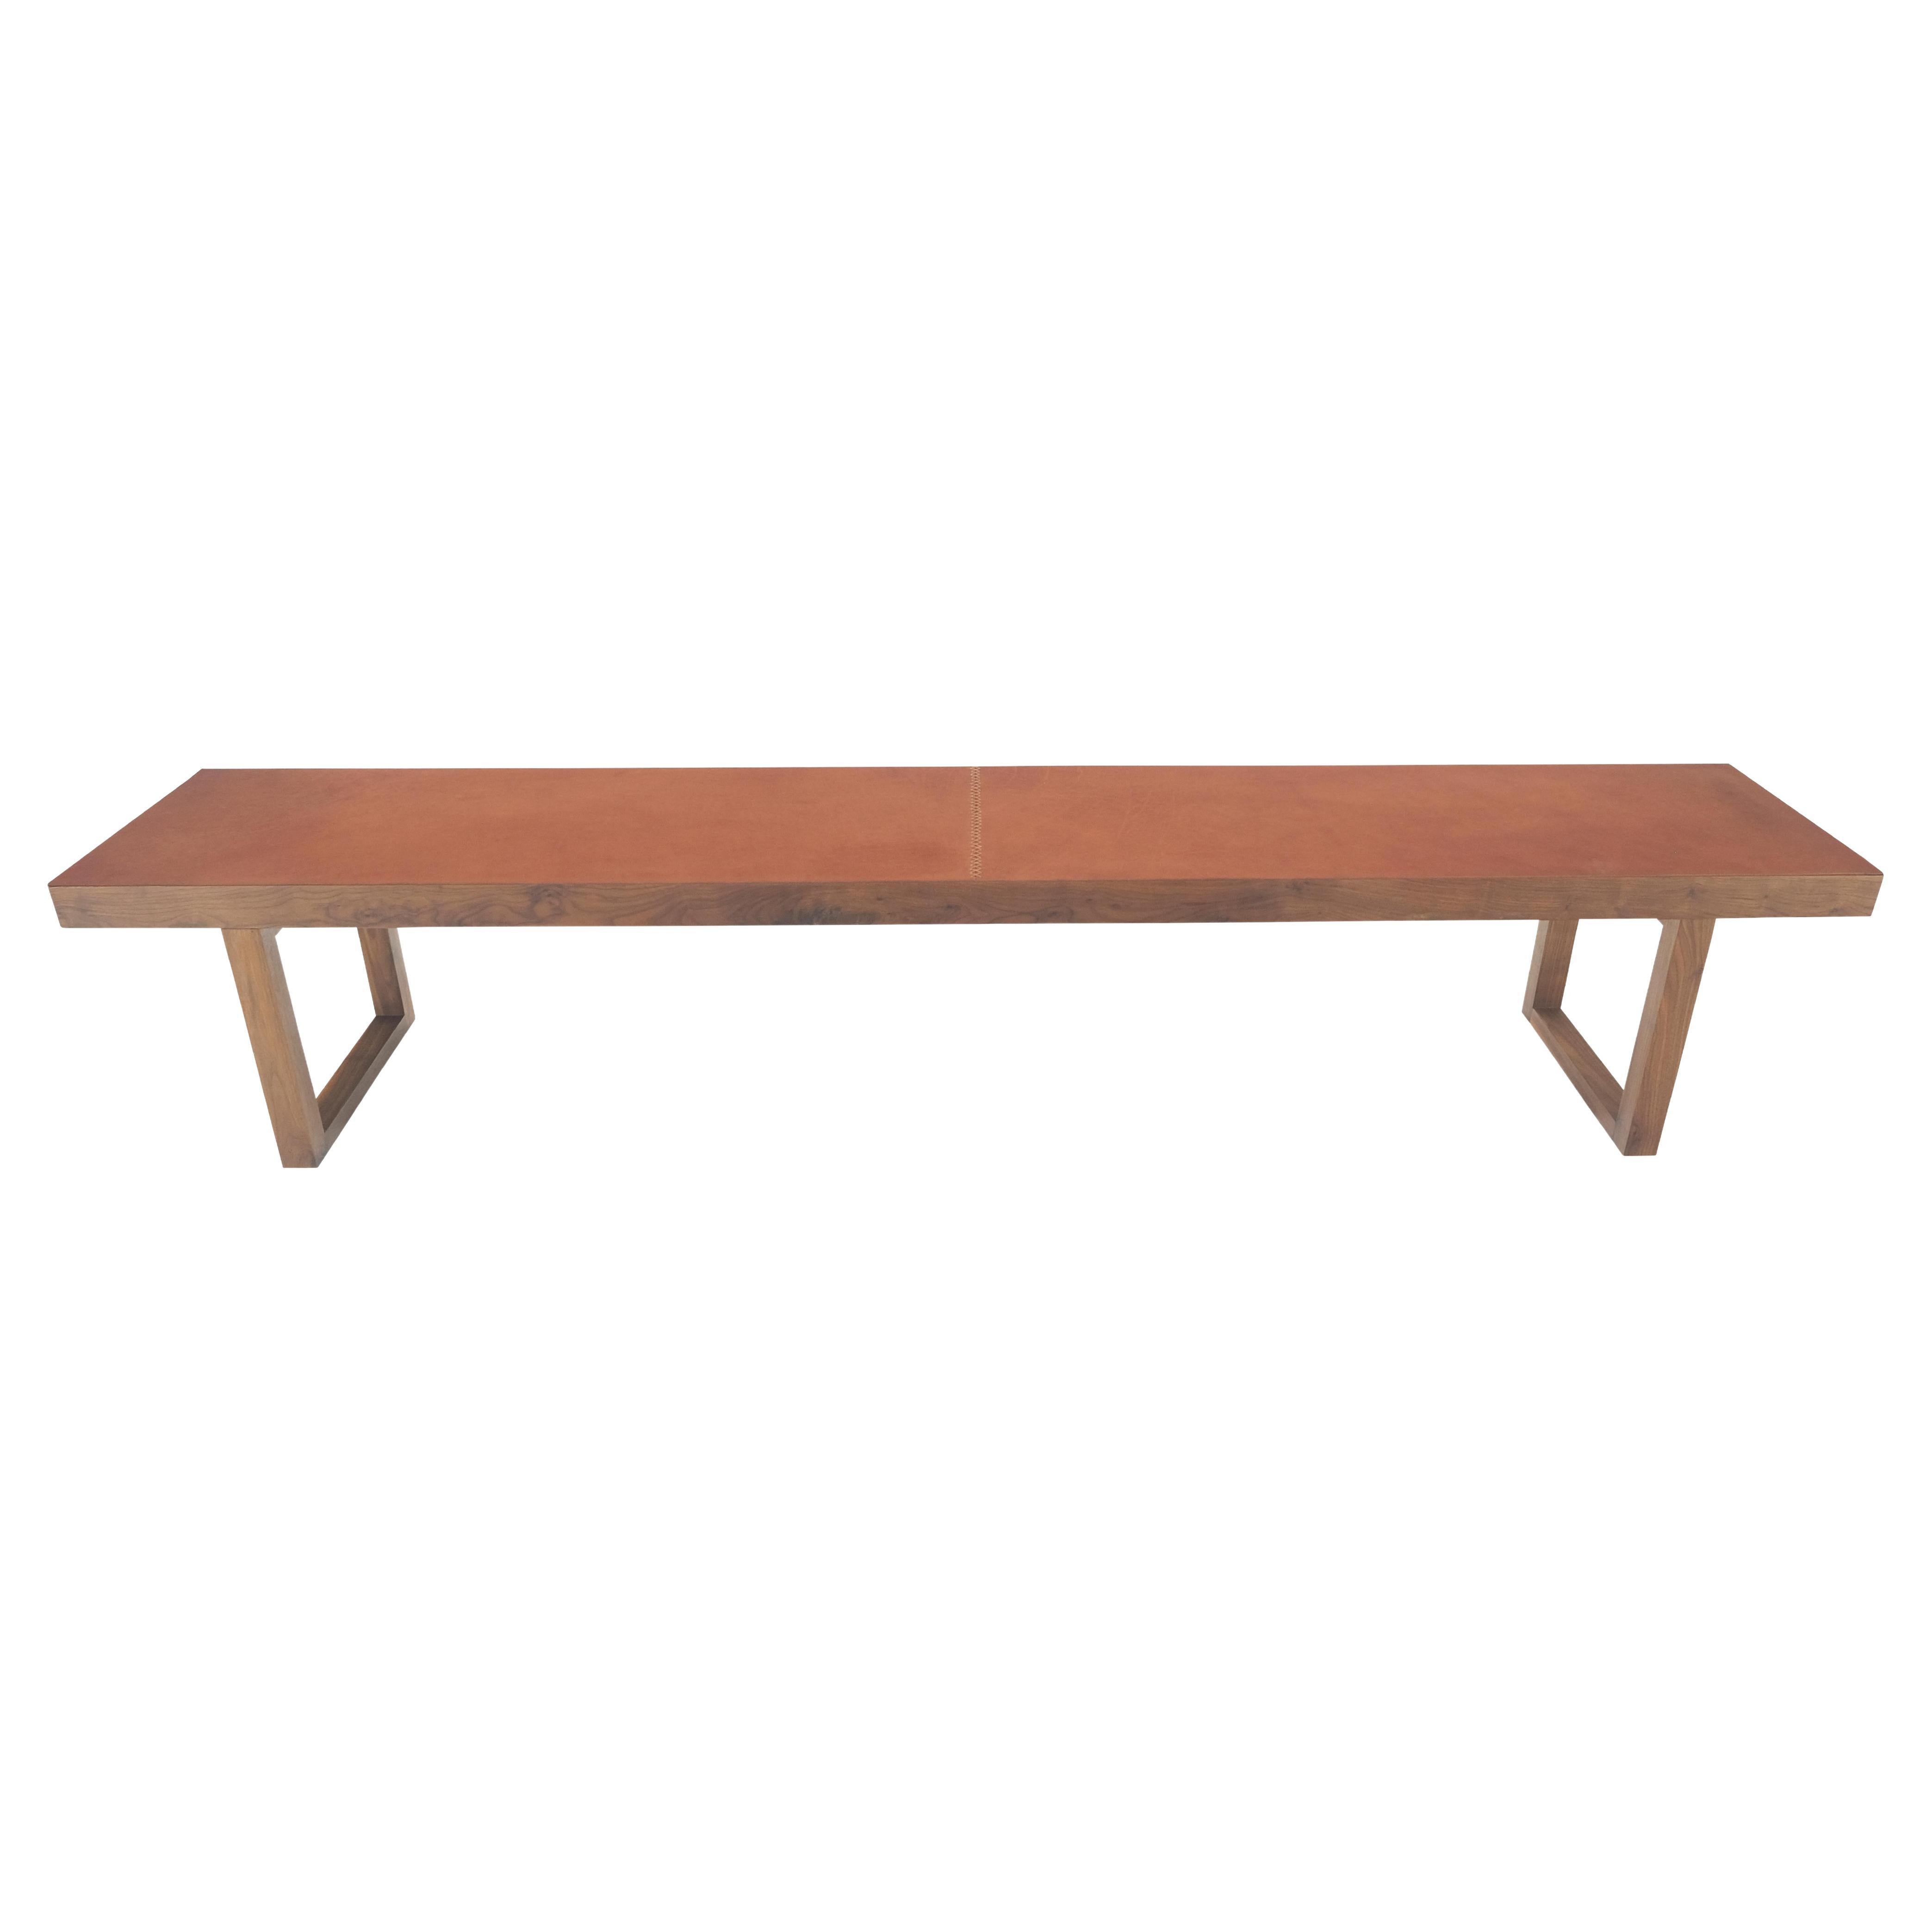 Slim Profile Solid Walnut Frame Integrated leather Cushion 7.5' Long Bench For Sale